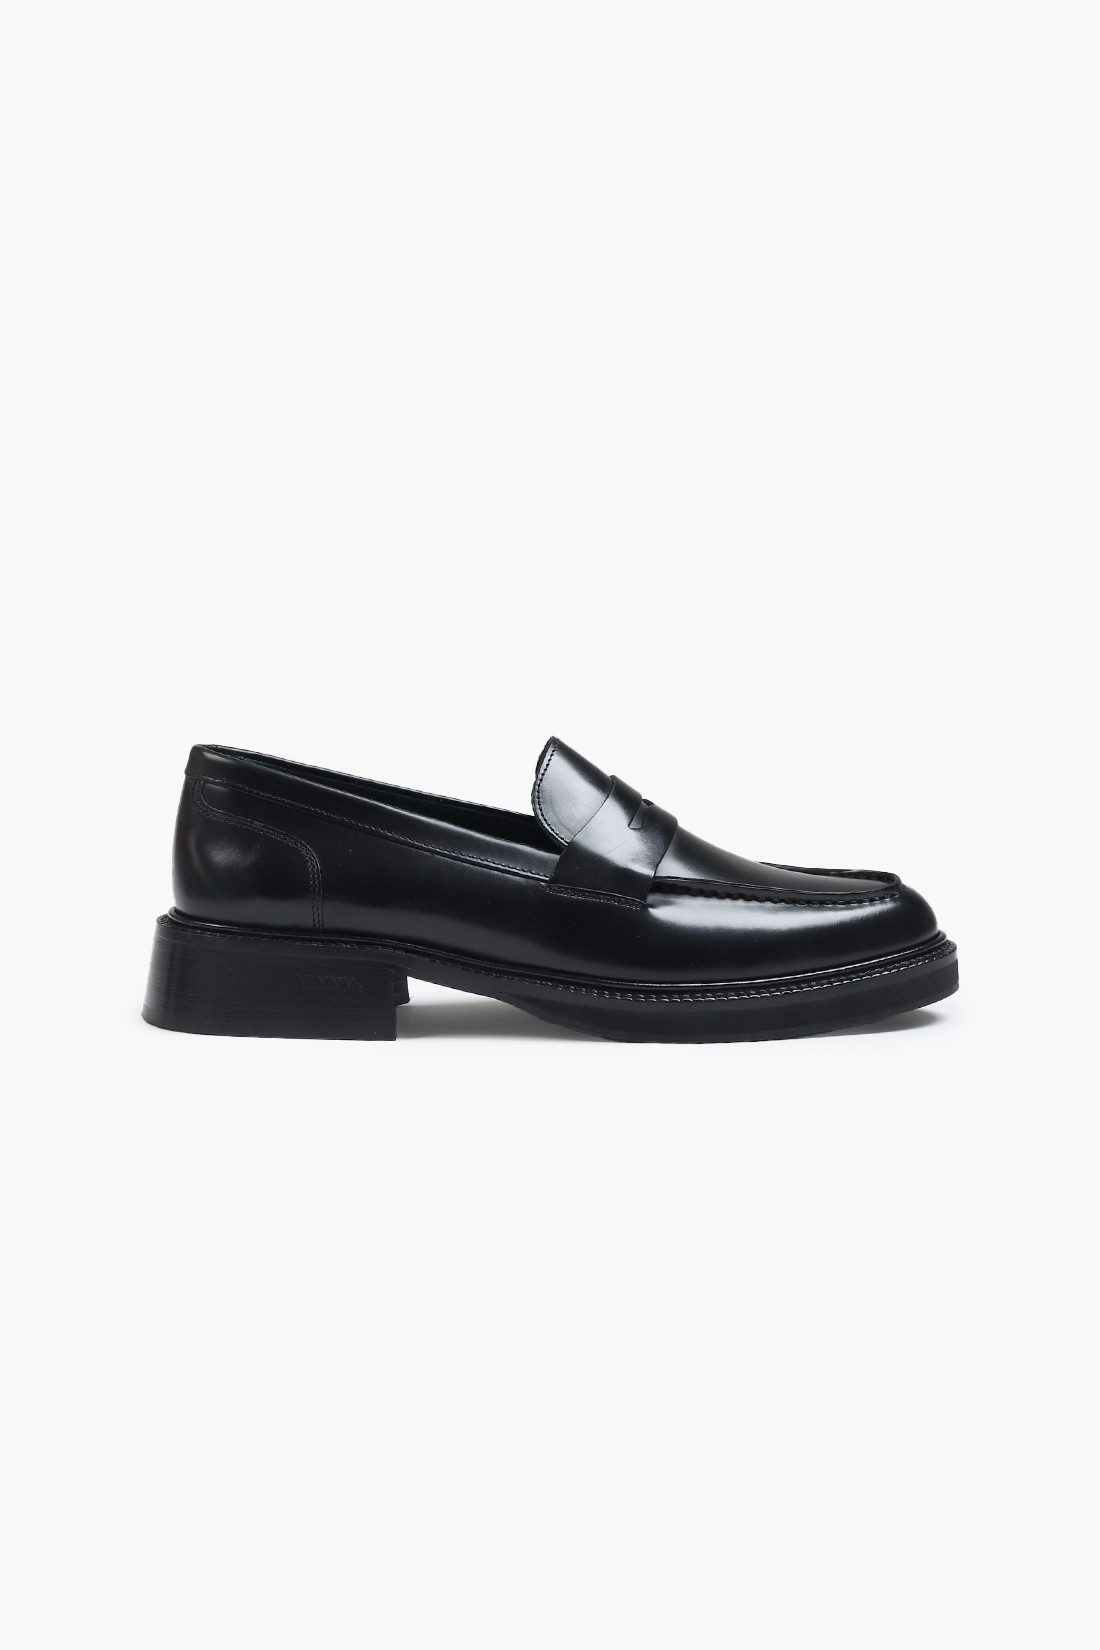 Heeled townee penny loafer Black polido